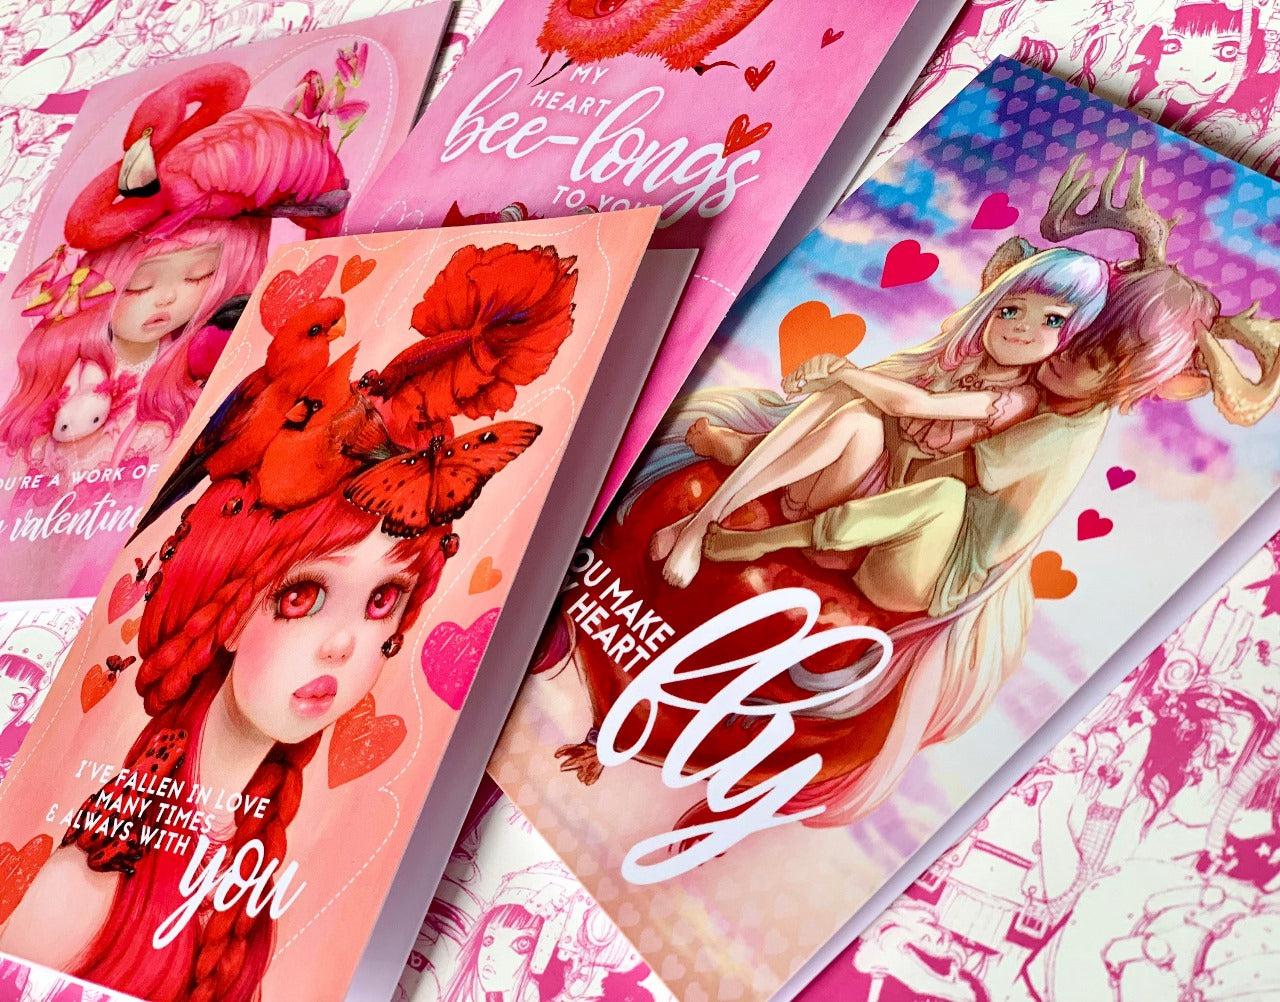 Valentine's Day Greeting Cards - Set of 4